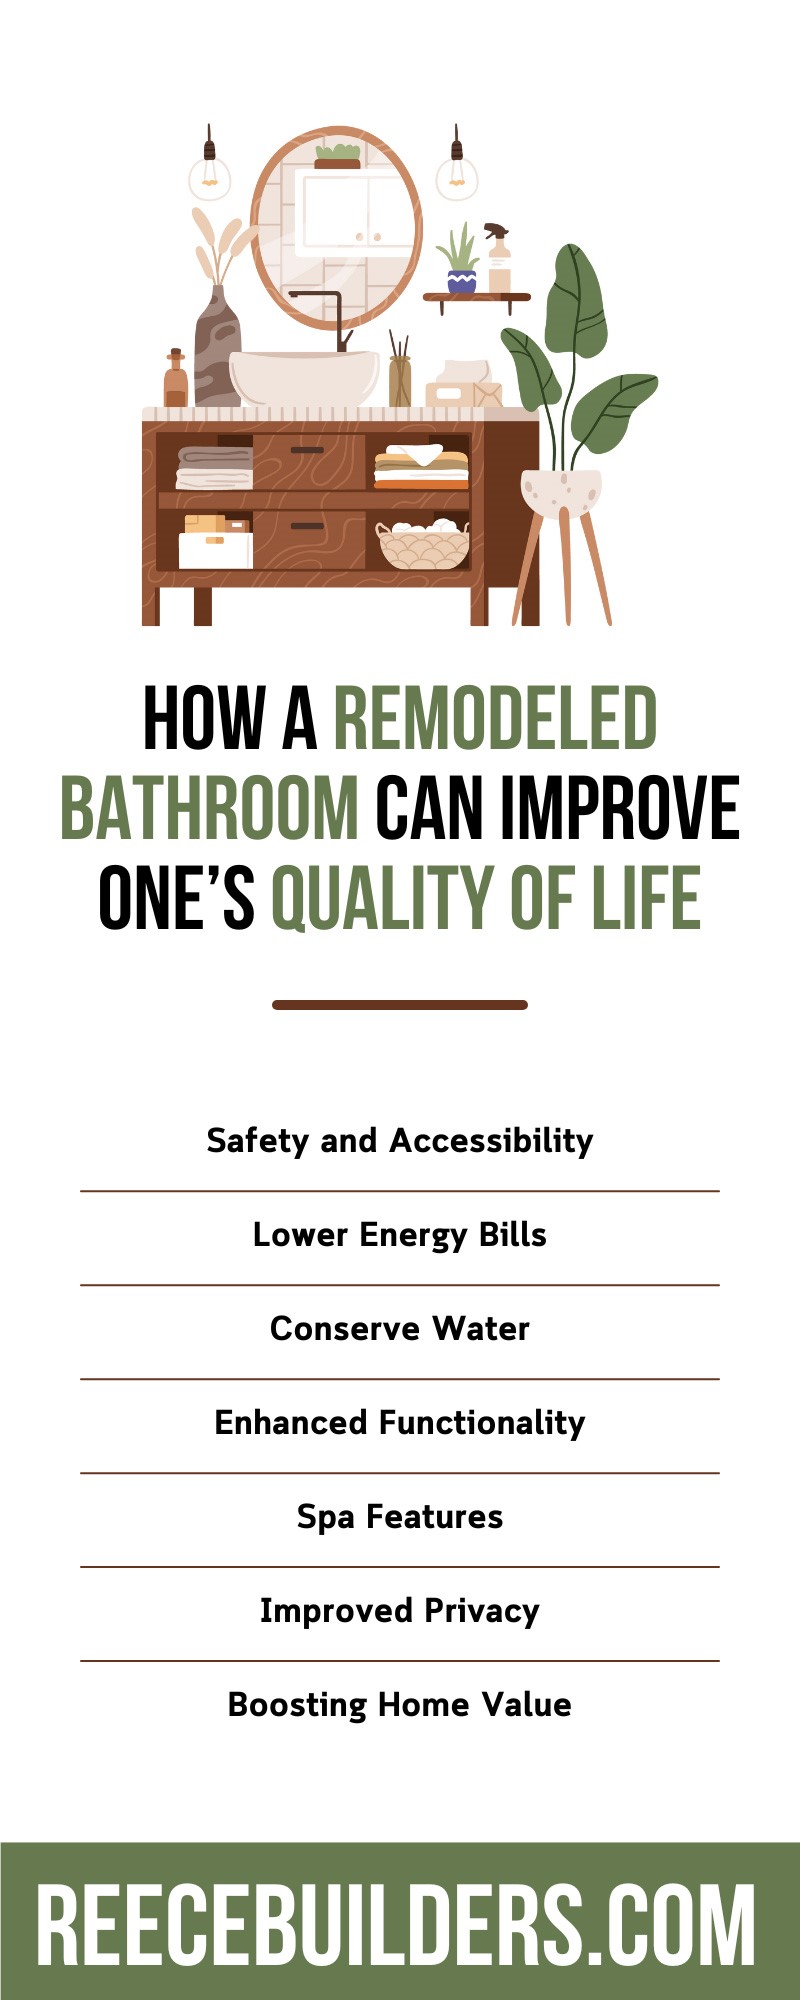 How a Remodeled Bathroom Can Improve One’s Quality of Life